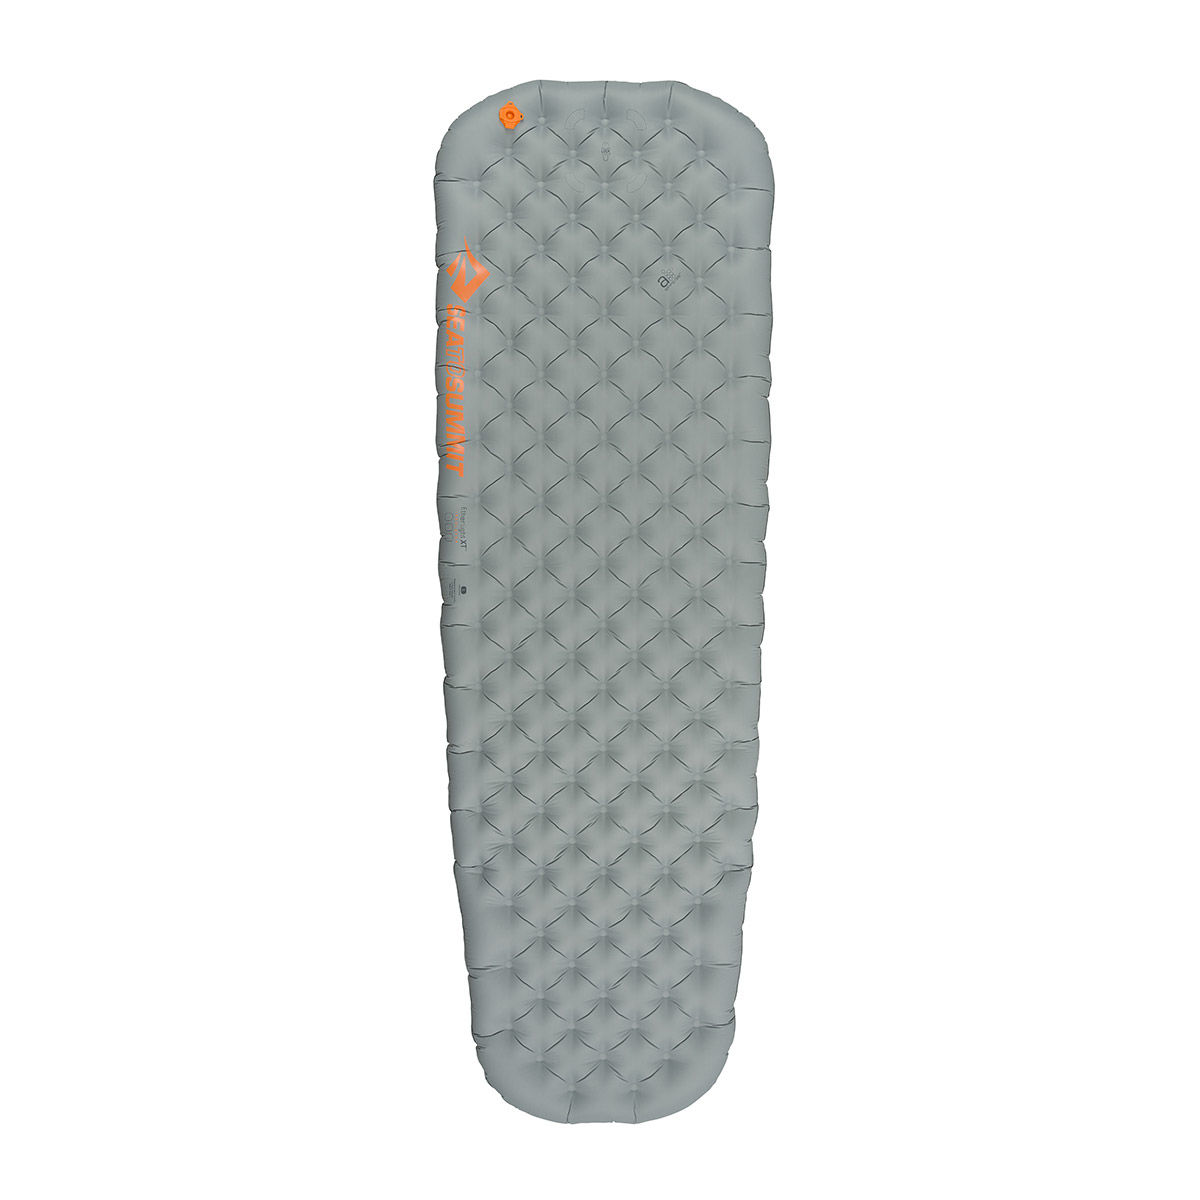 Sea to Summit Ether Light XT Insulated inflatable sleeping pad